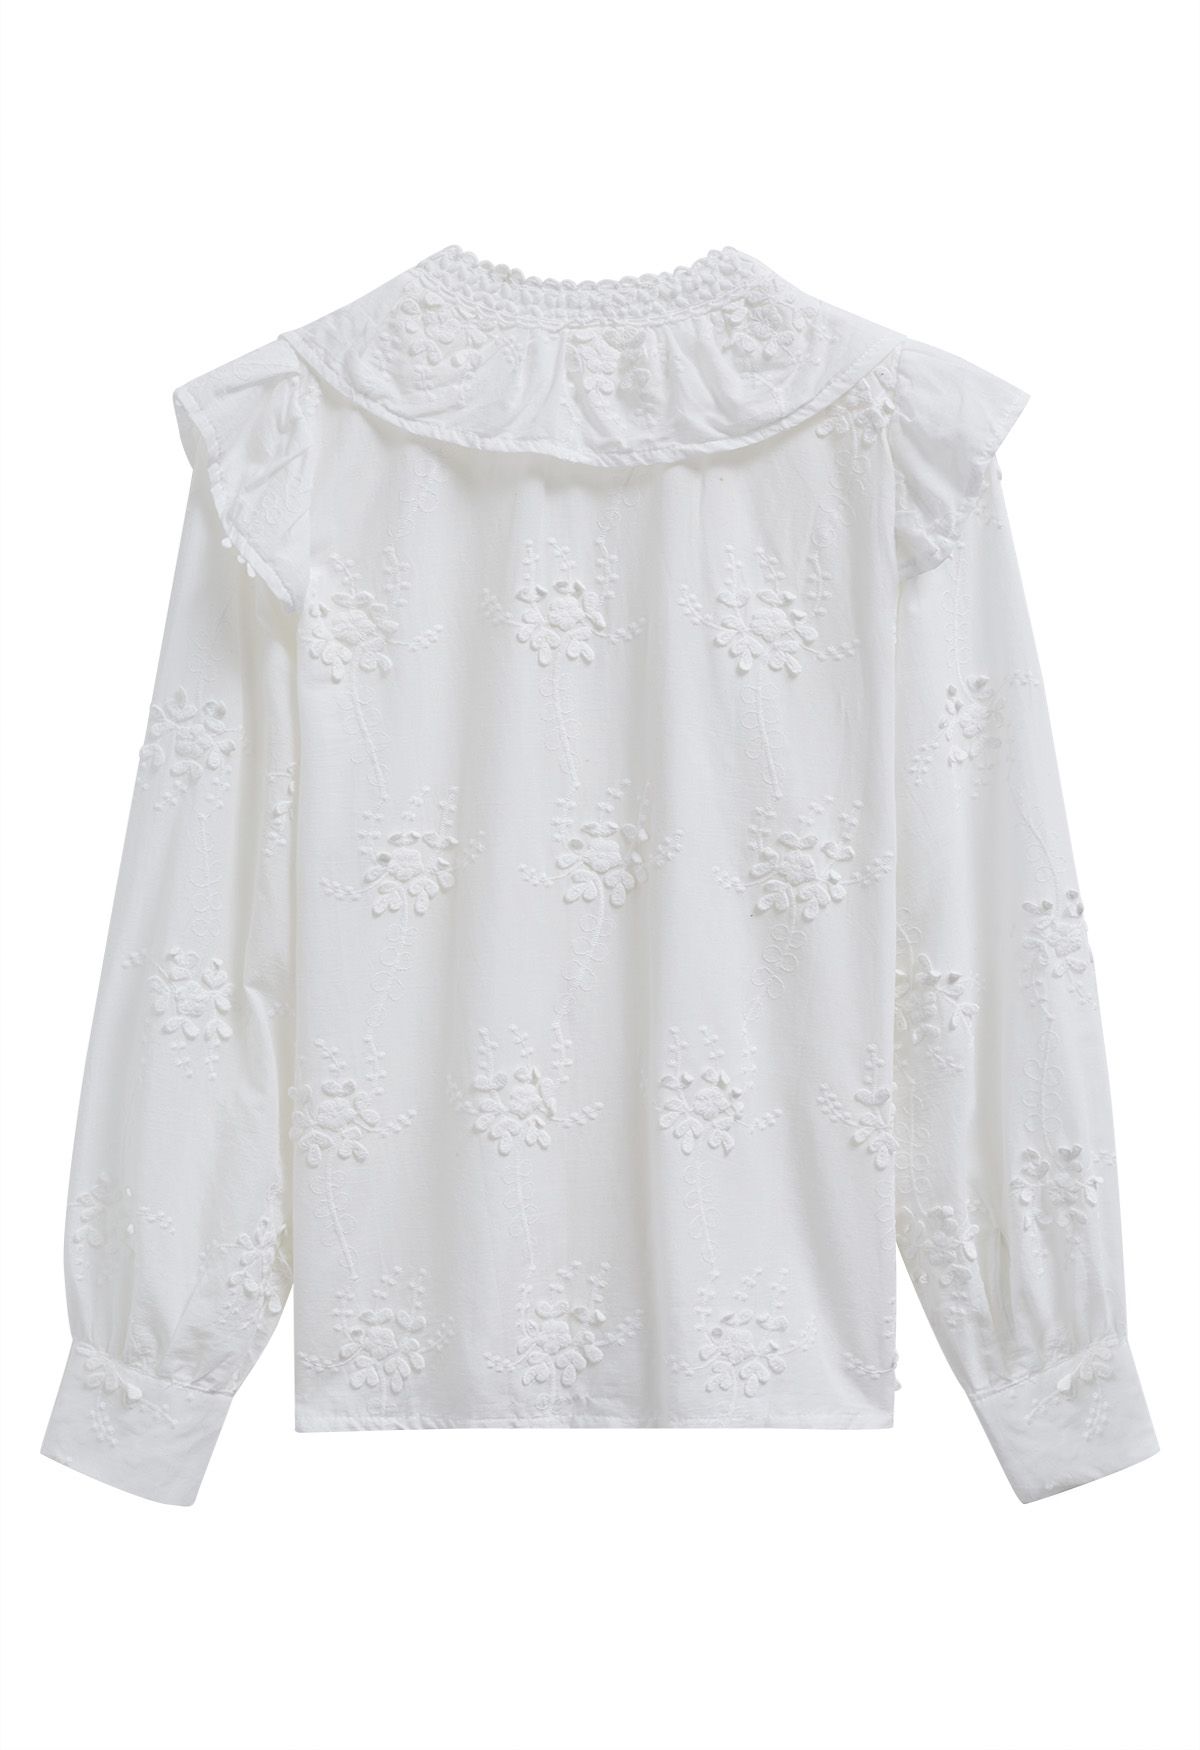 Floret Embroidery Ruffled Buttoned Top in White